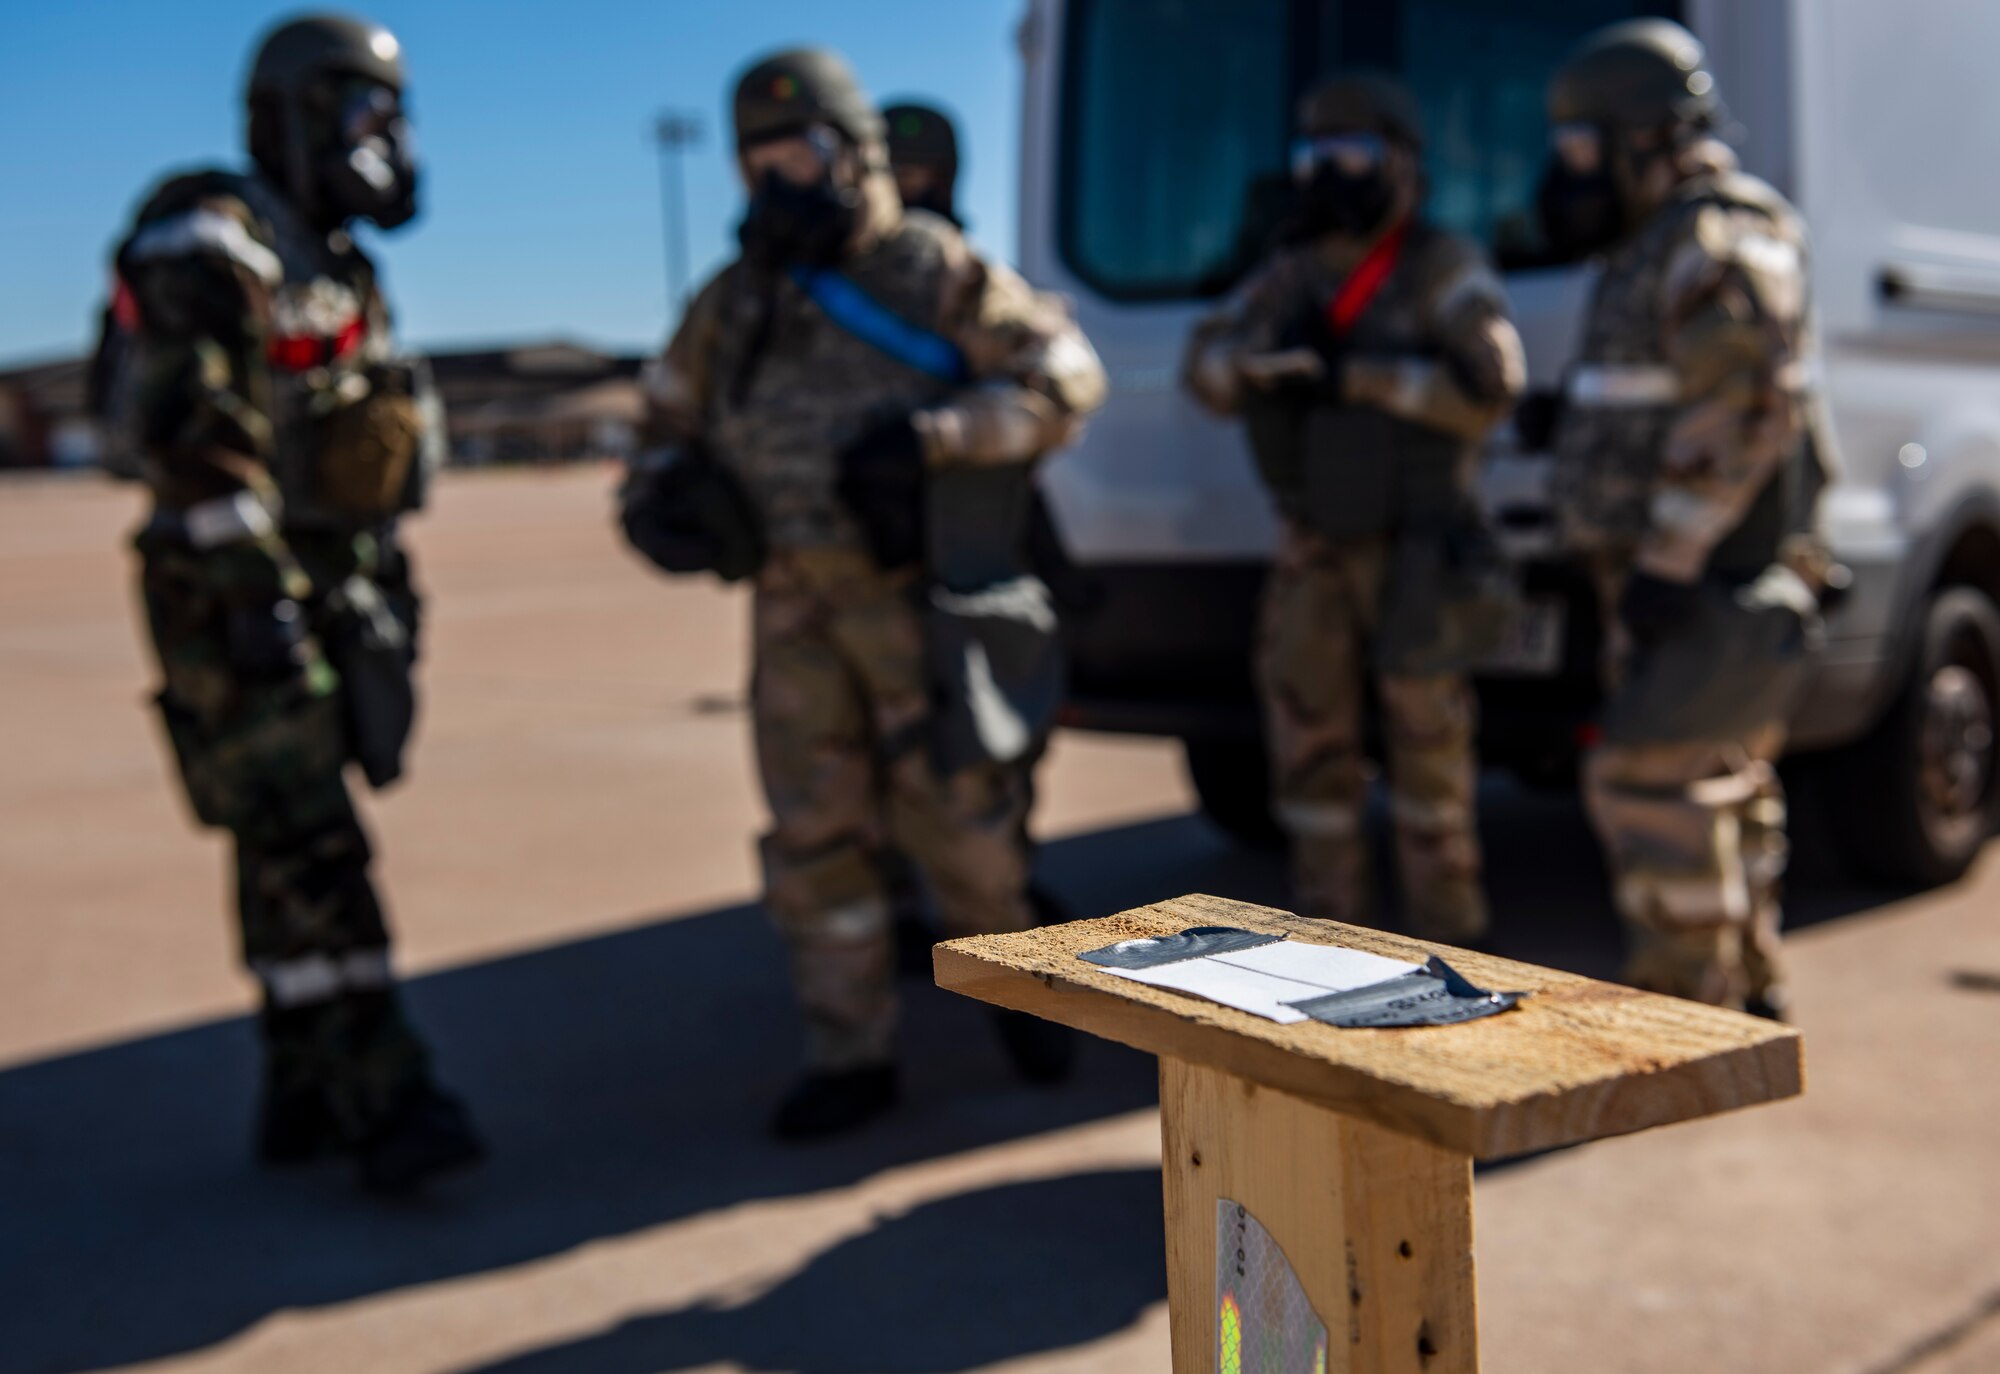 Airmen assigned to the 317th Maintenance Group and 317th Aircraft Maintenance Squadron review simulated M9 chemical detection paper during the Chemical Fury exercise at Dyess Air Force Base, Texas, Nov. 18, 2020.